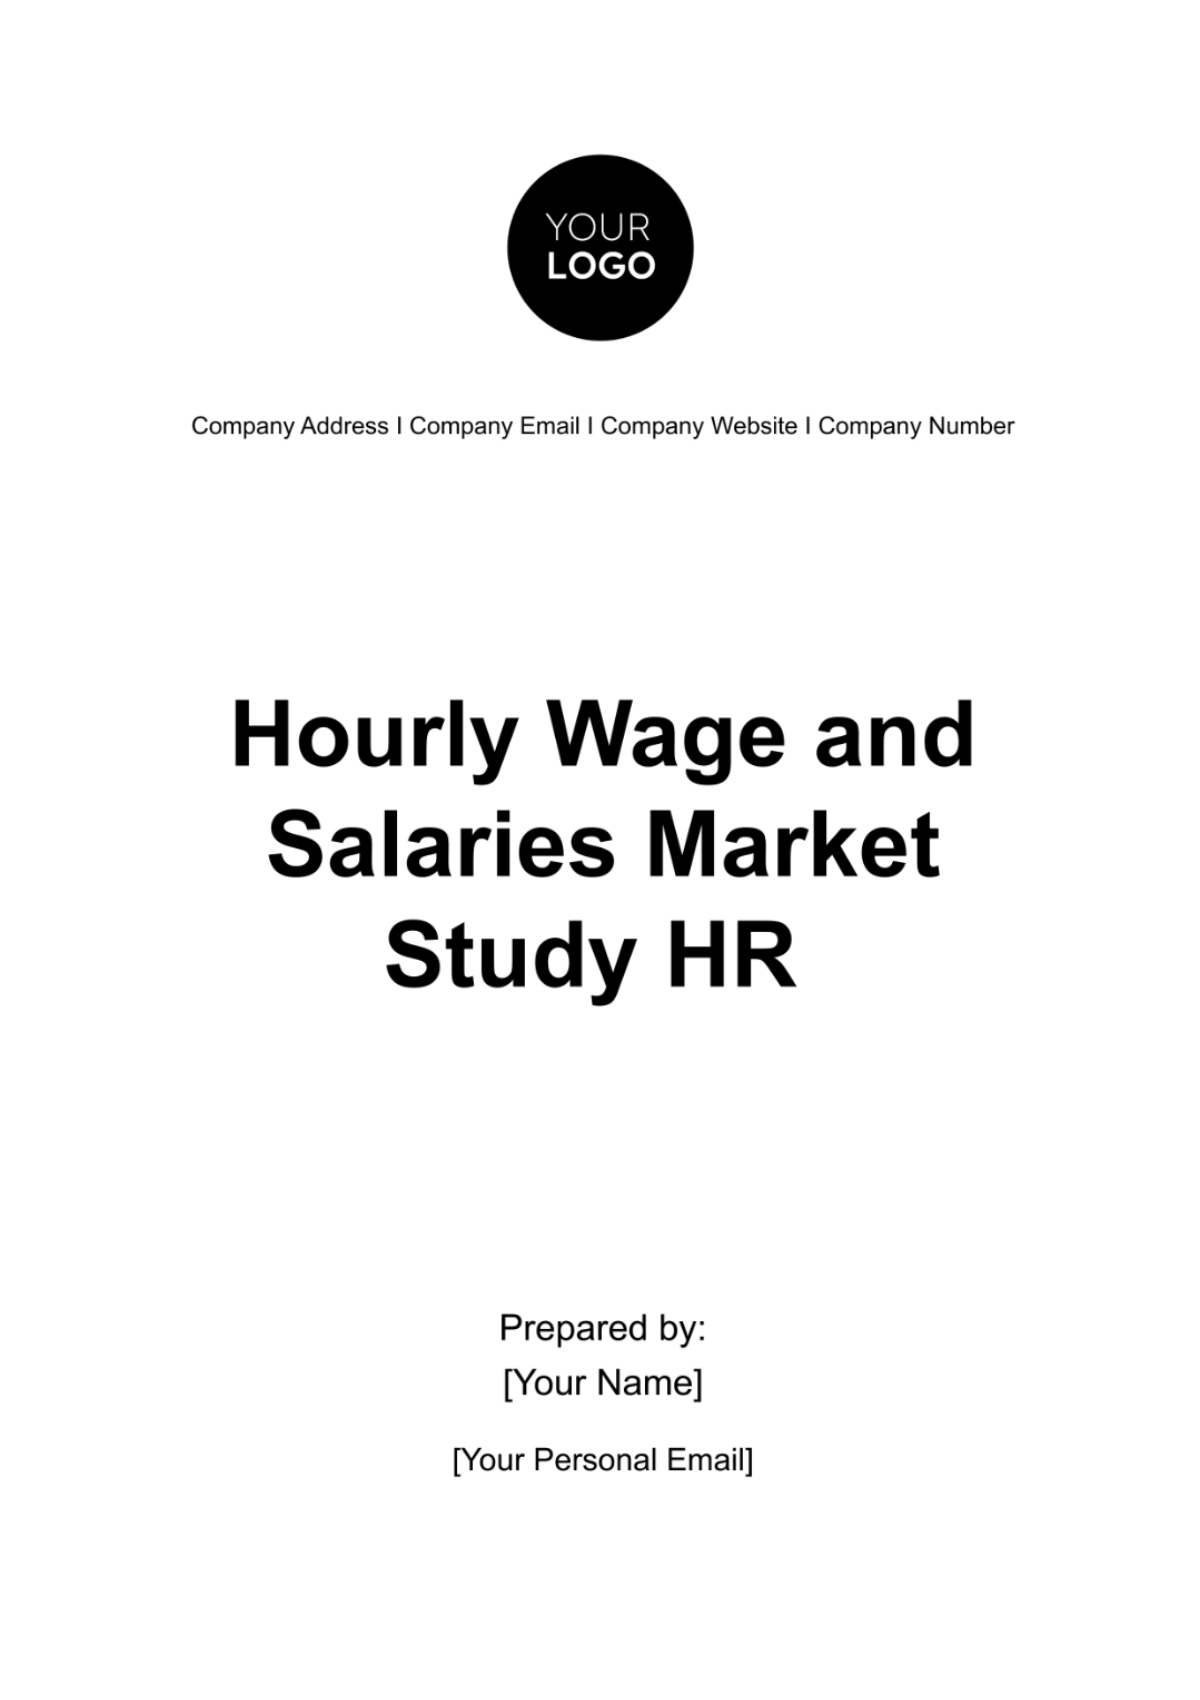 Free Hourly Wage and Salaries Market Study HR Template